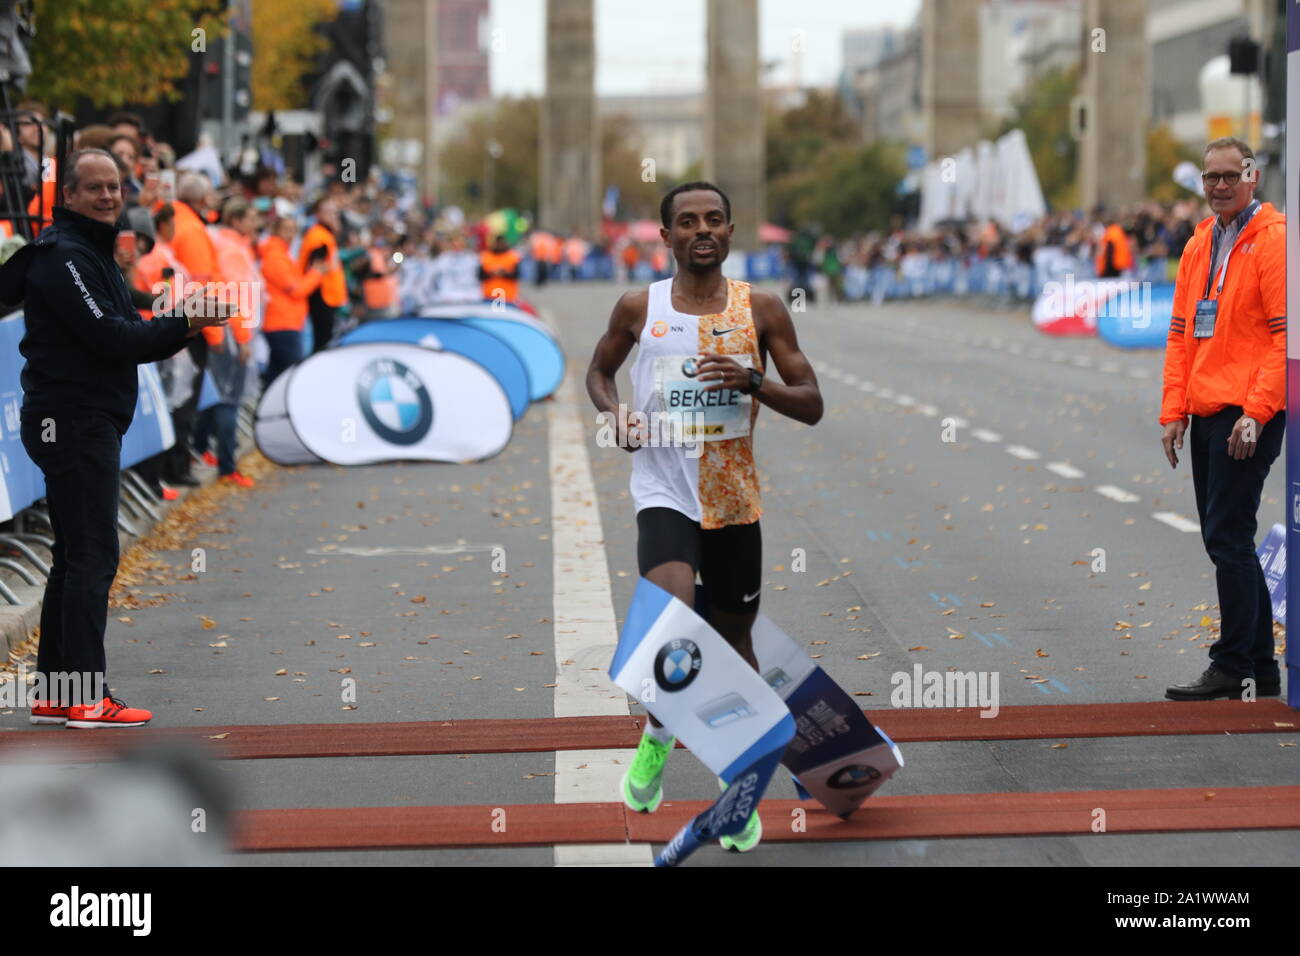 09/19/2019, Berlin, Germany, Kenenisa Bekele at the finish Kenenisa Bekele from Ethiopia wins the 46th Berlin Marathon in 02:01:41 hours. Birhanu Legese (2:02:48) wins the second place and Sisay Lemma (2:03:36) comes in third place. Stock Photo